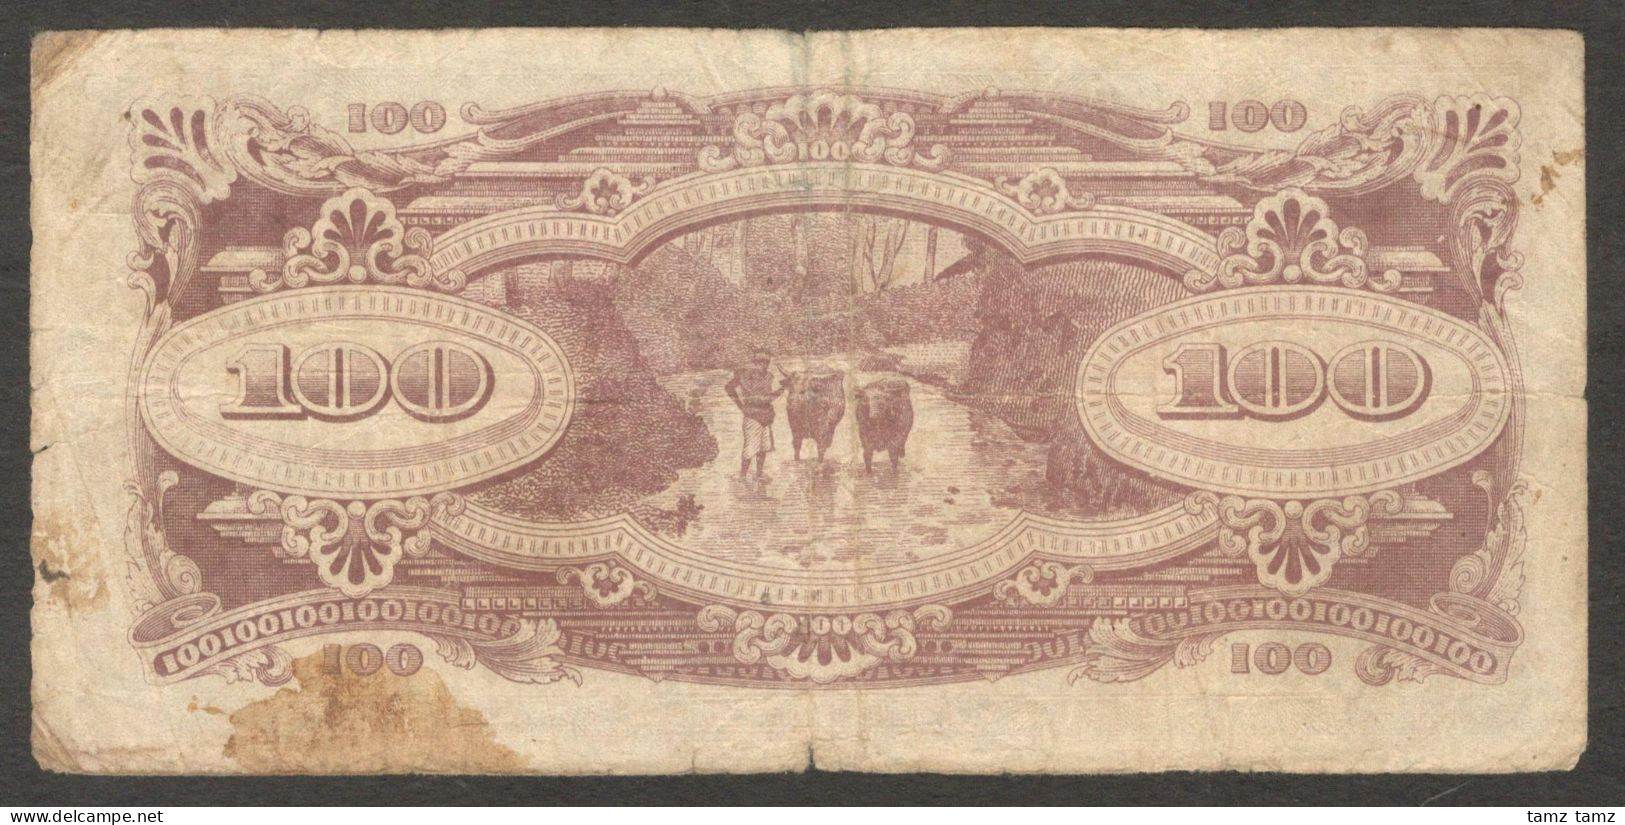 Netherlands Indies Indonesia Japanese Occupation 100 Rupiah 1944 Engraved VG - Indonesia